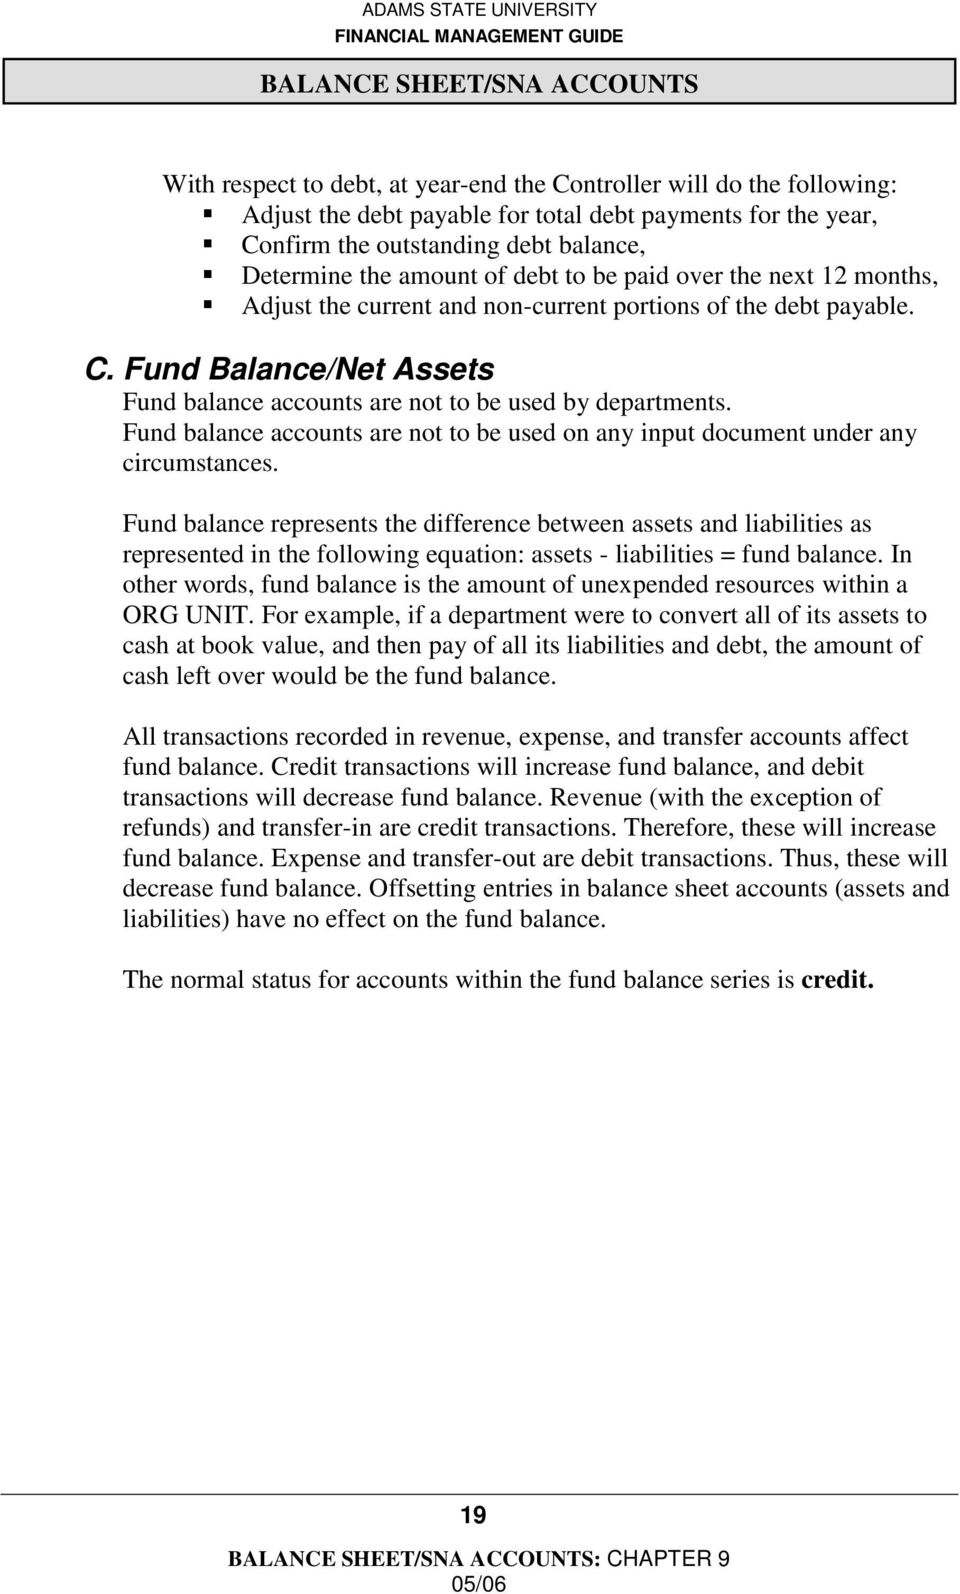 Fund balance accounts are not to be used on any input document under any circumstances.